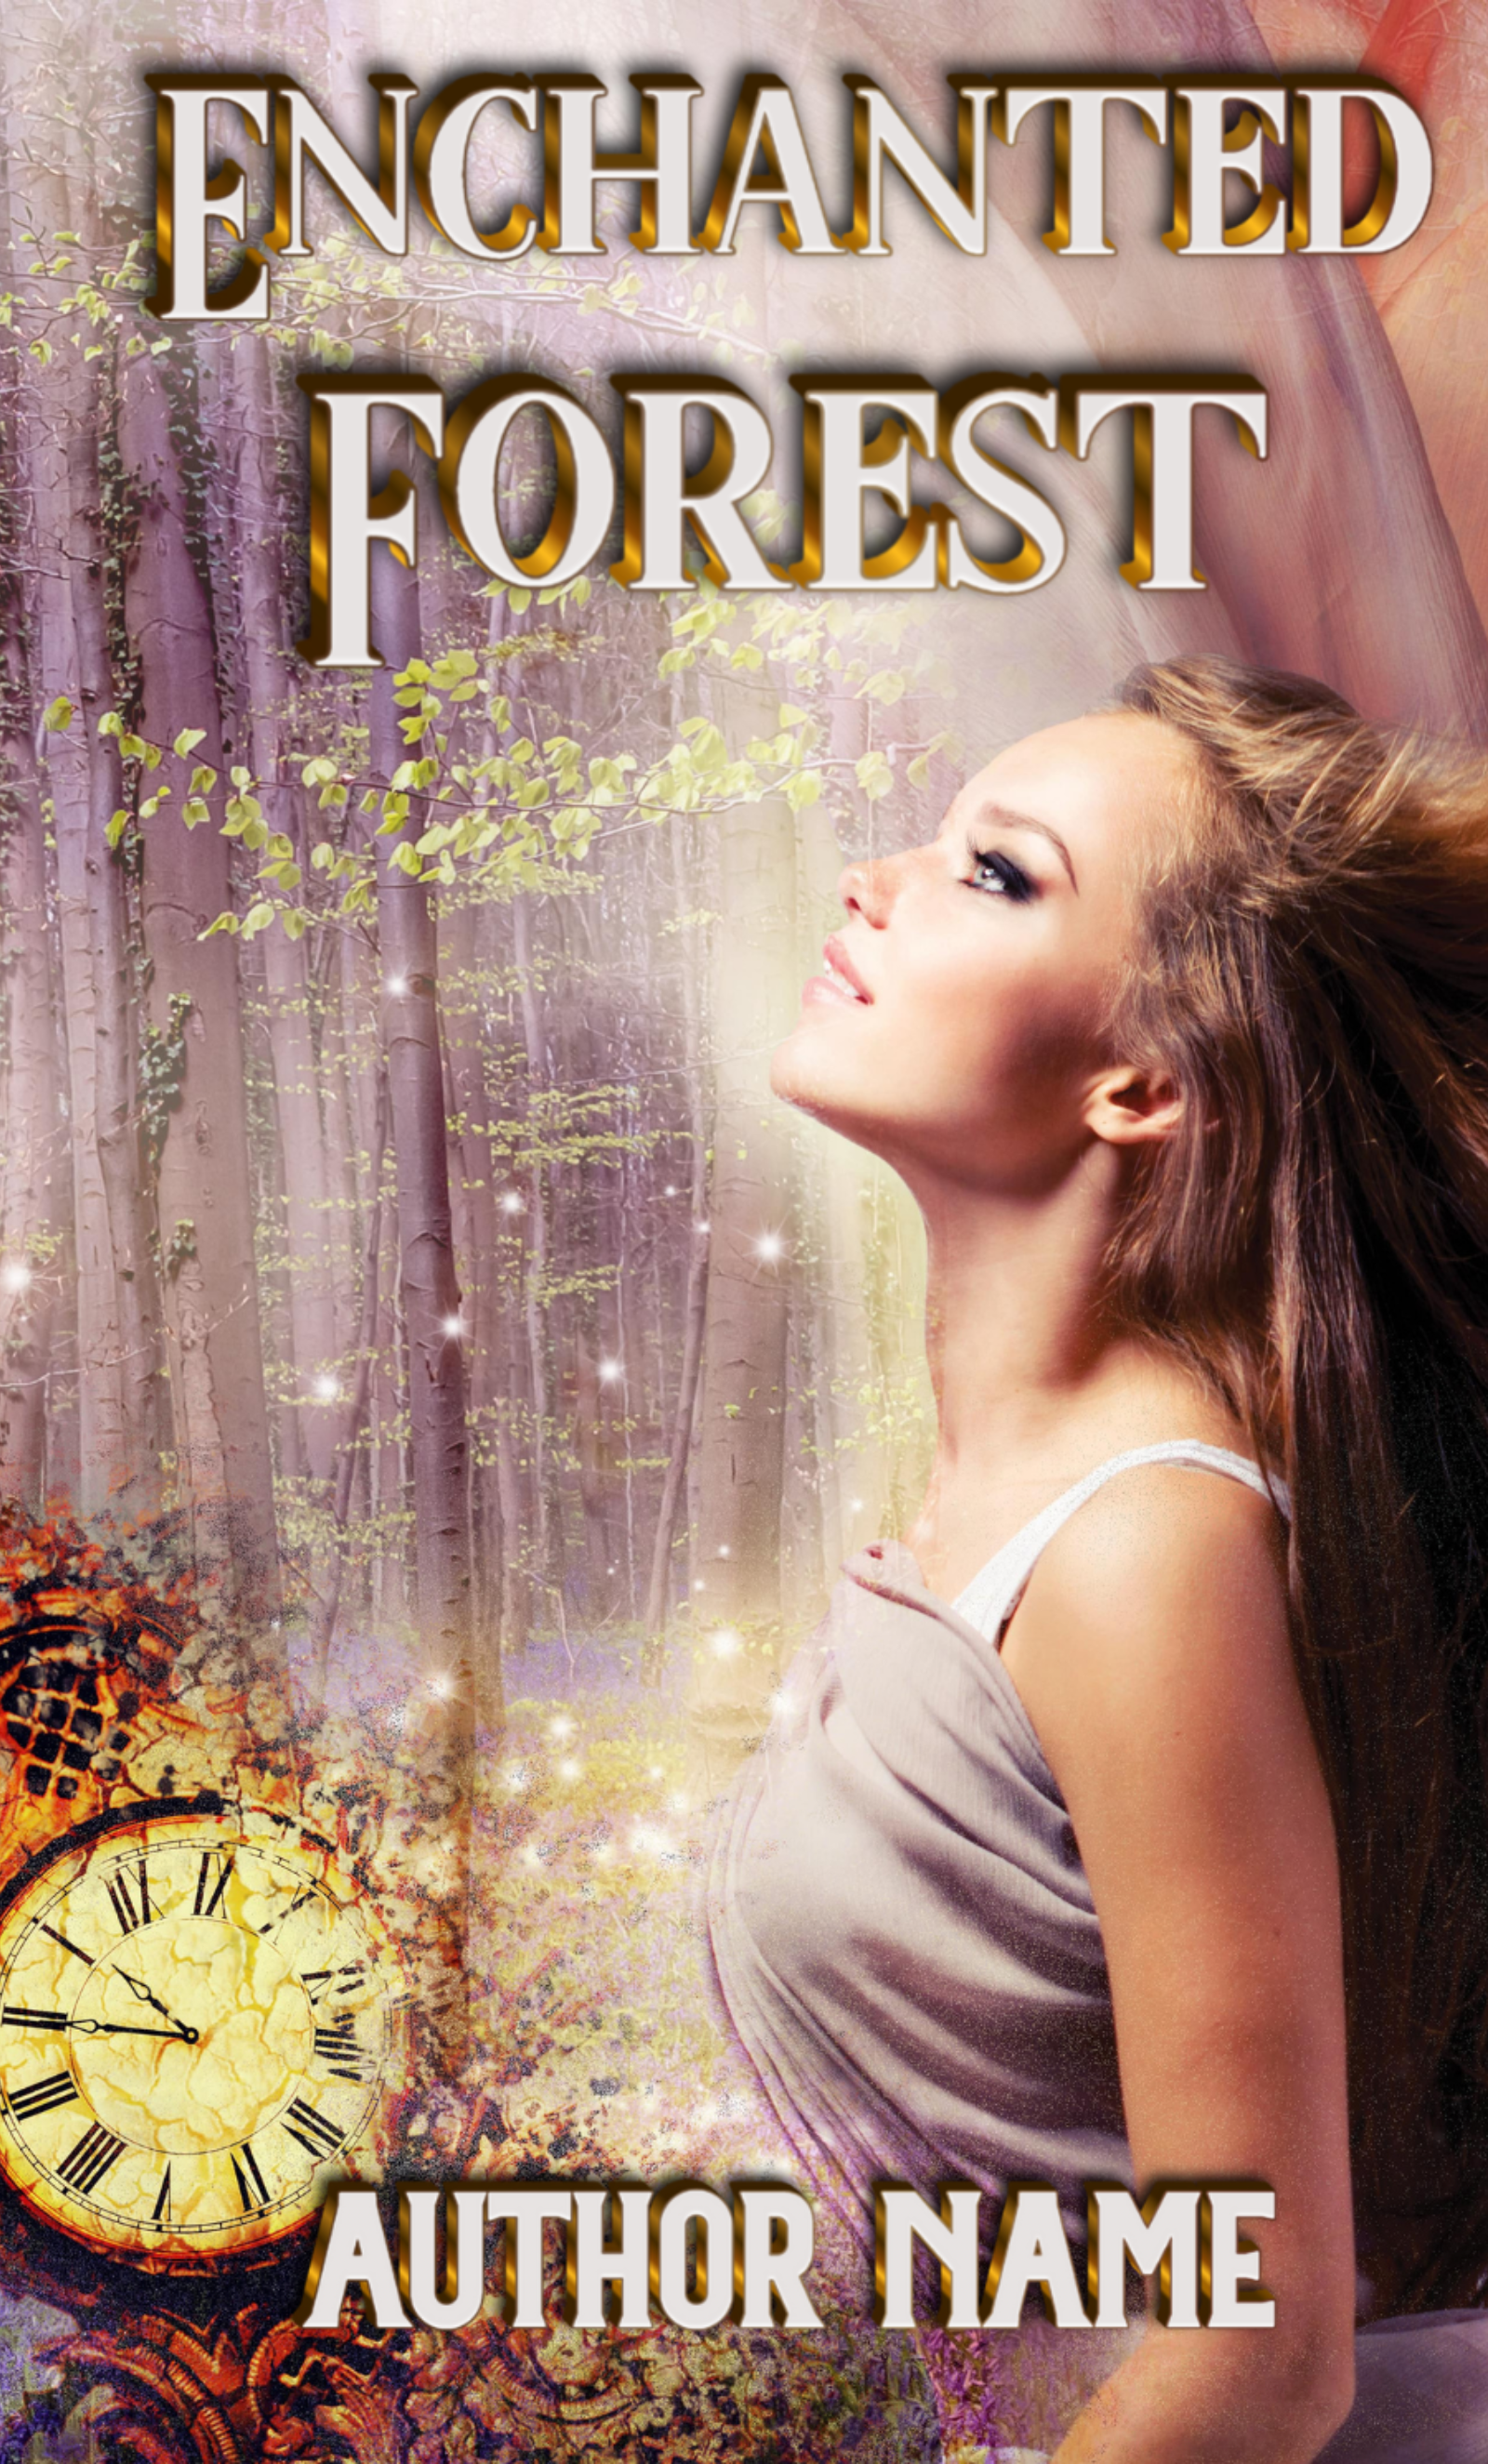 Book cover featuring a woman in profile with long hair, looking upwards amidst a mystical forest scene. The background shows tall, ethereal trees with a sparkling, magical aura. A large, ornate clock with Roman numerals is at the bottom left. The title "Enchanted Forest" and "Karen Barnett" are in bold gold letters. BookSelf Book Cover Design & Premade Book Covers